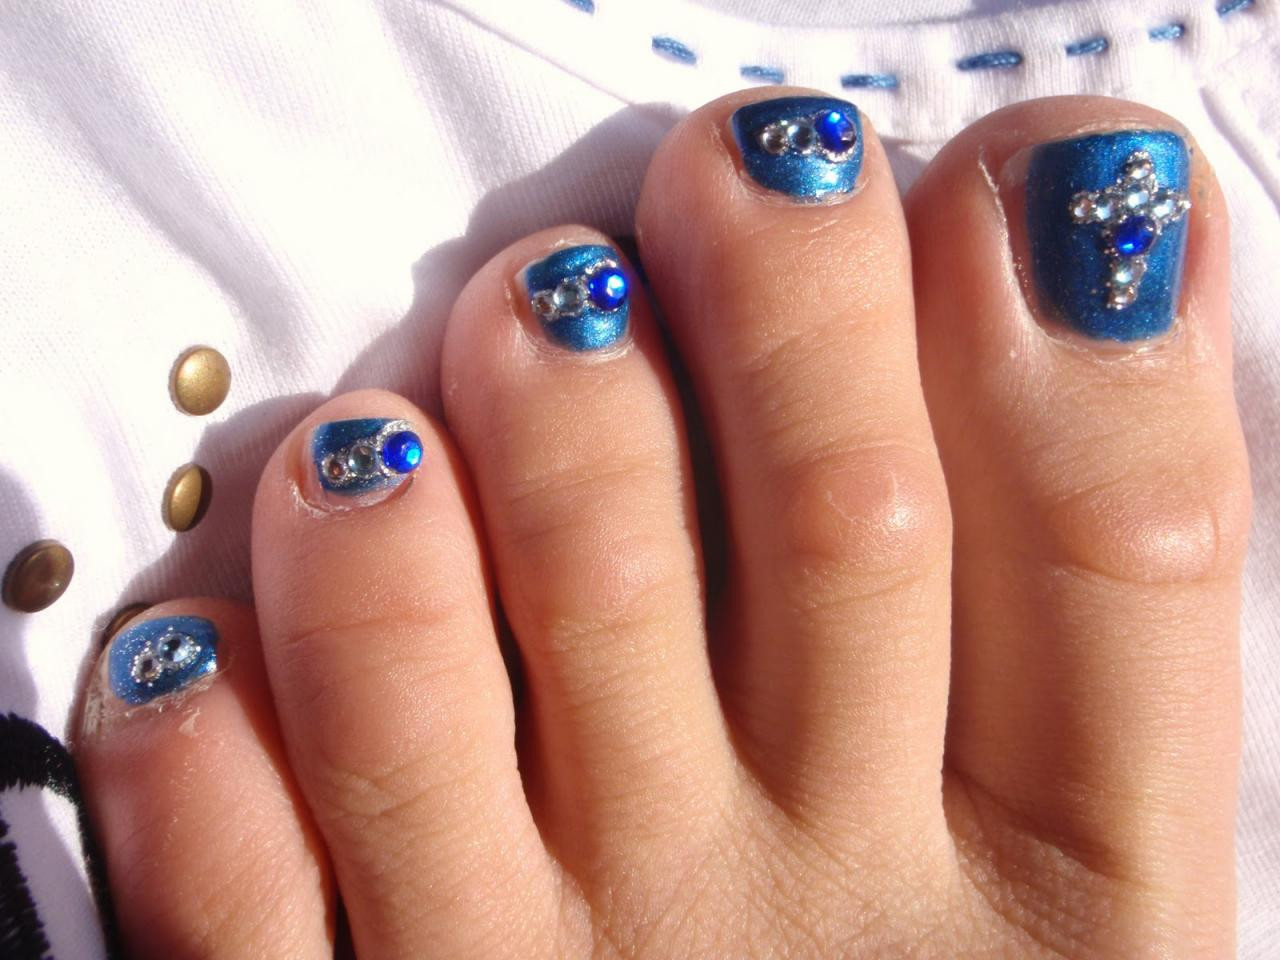 Toe Nail Designs Pictures
 Pedicures Just Got Better With These 50 Cute Toe Nail Designs